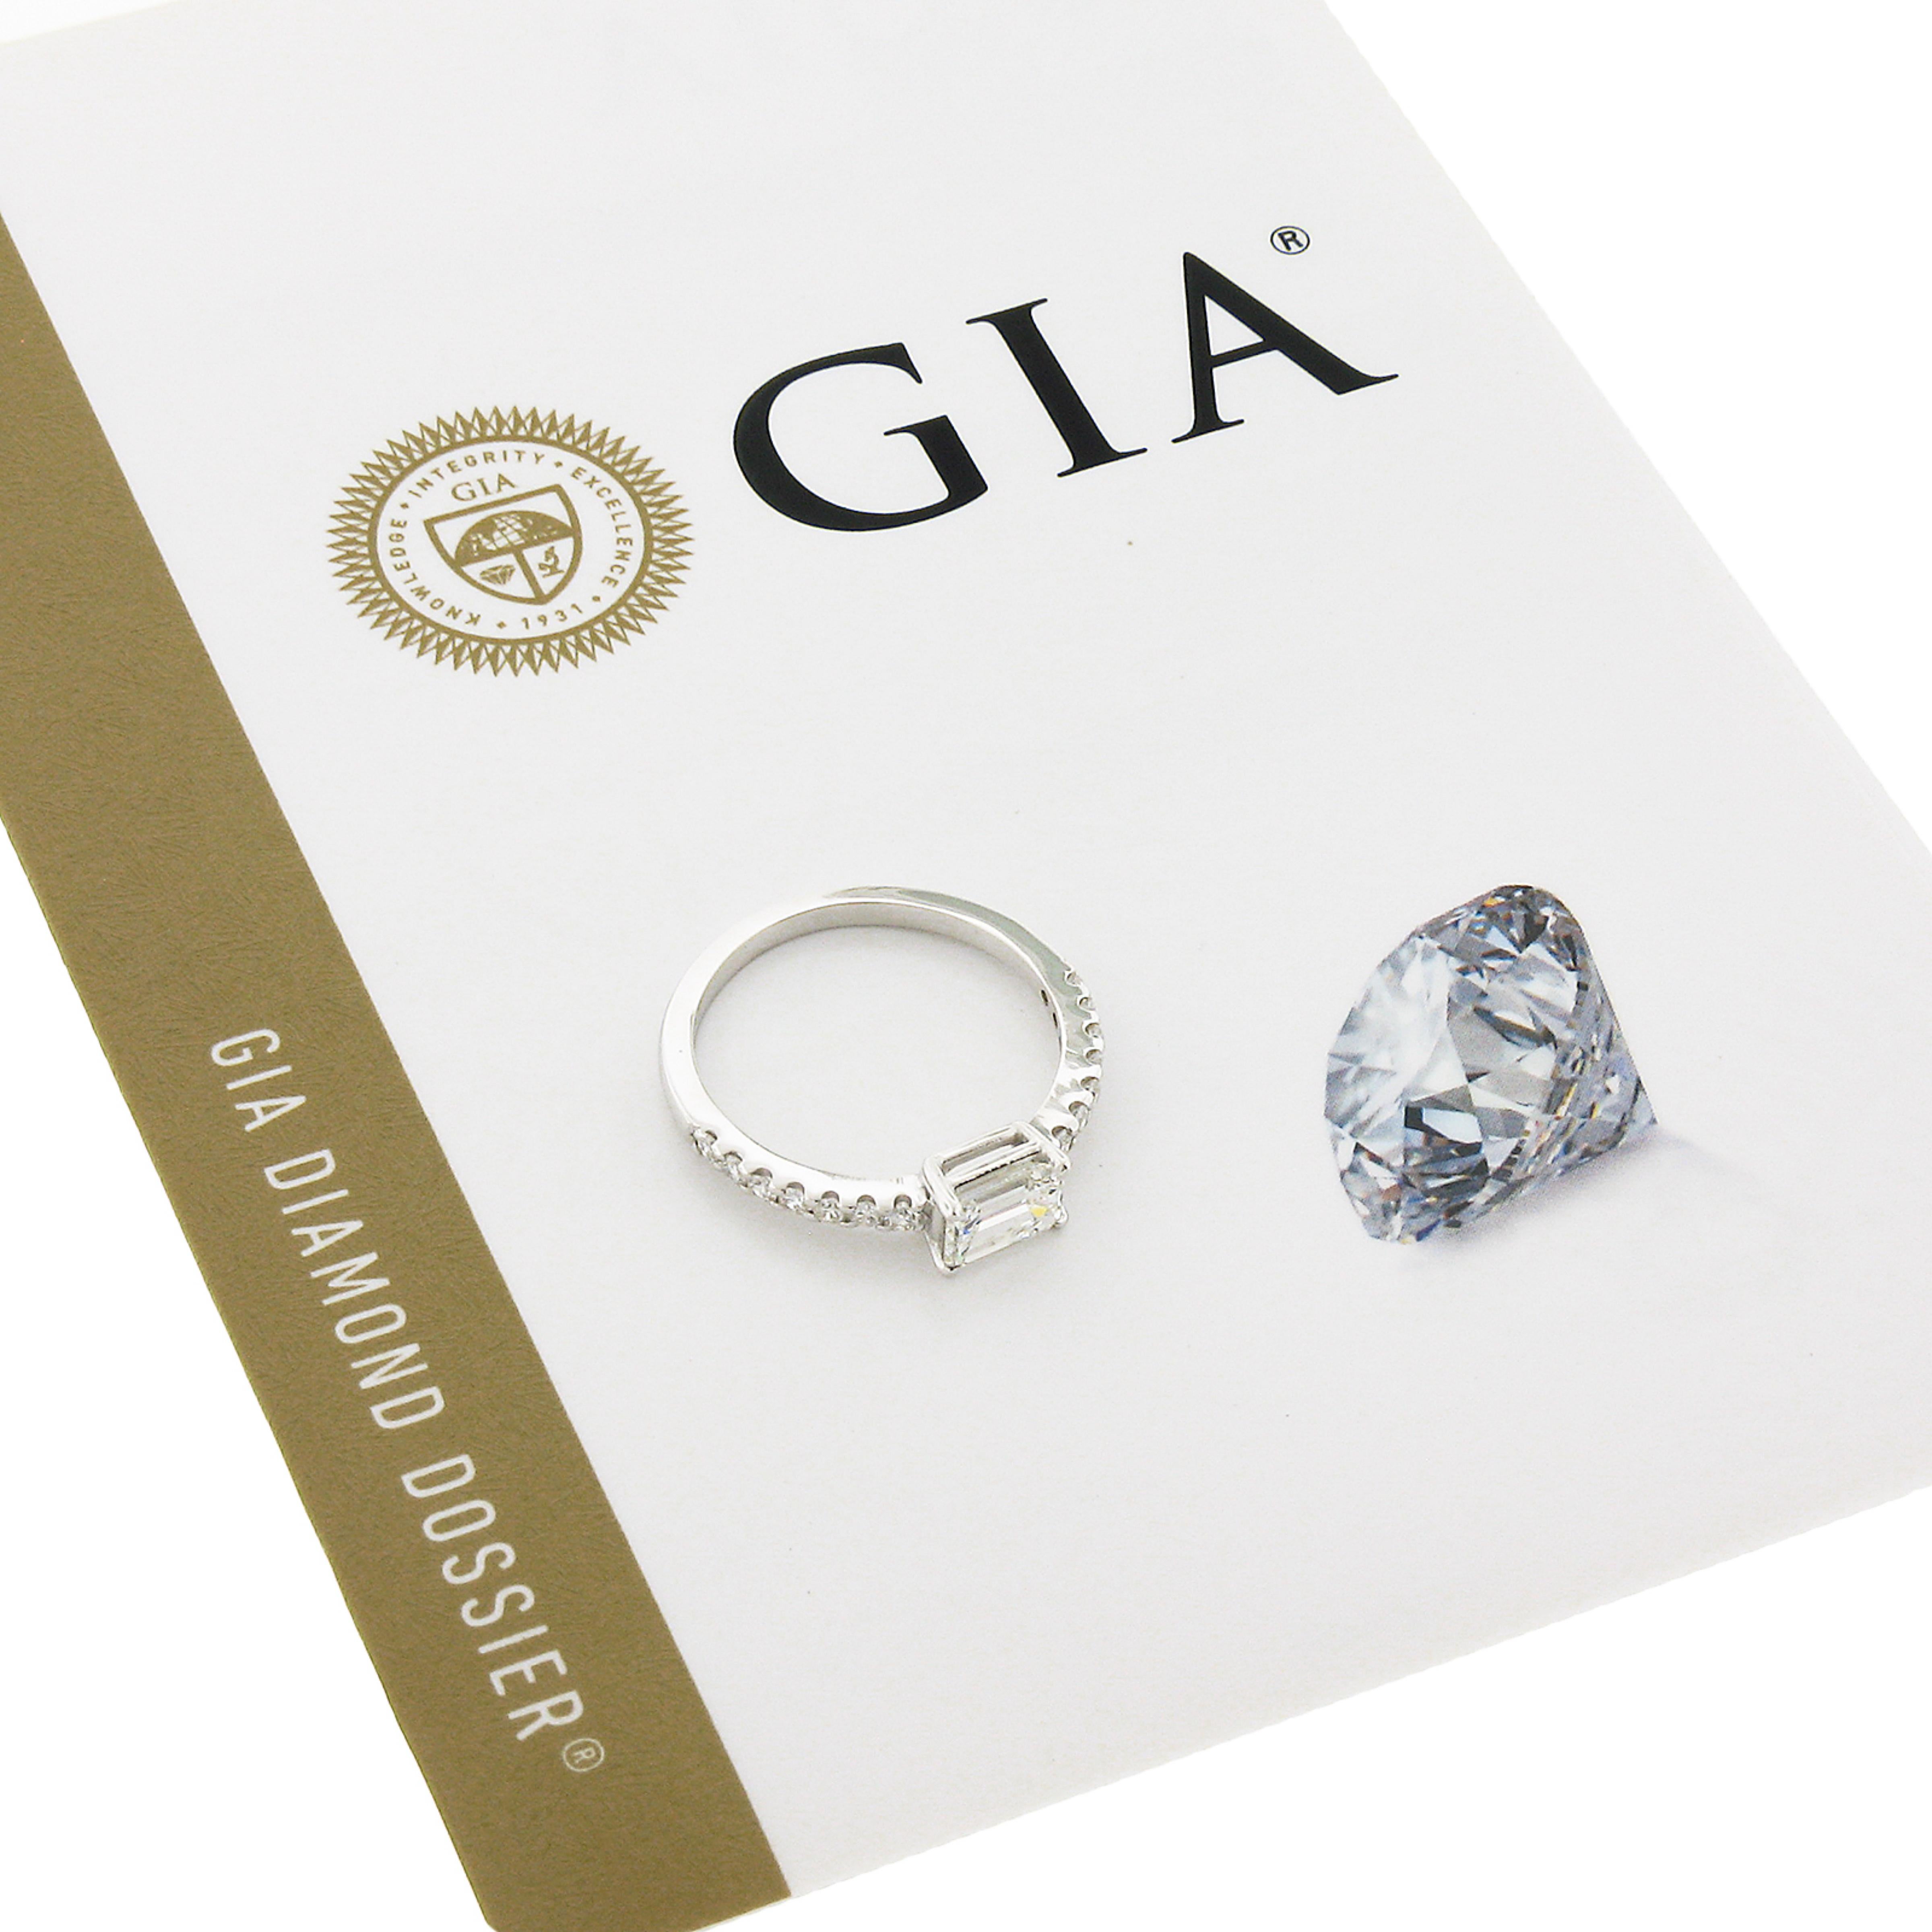 This chic and super stylish diamond sideways ring is newly crafted in solid 14k white gold and features a beautiful, GIA certified emerald cut diamond solitaire prong set at its center. This solitaire stone is accented on either side with a set of